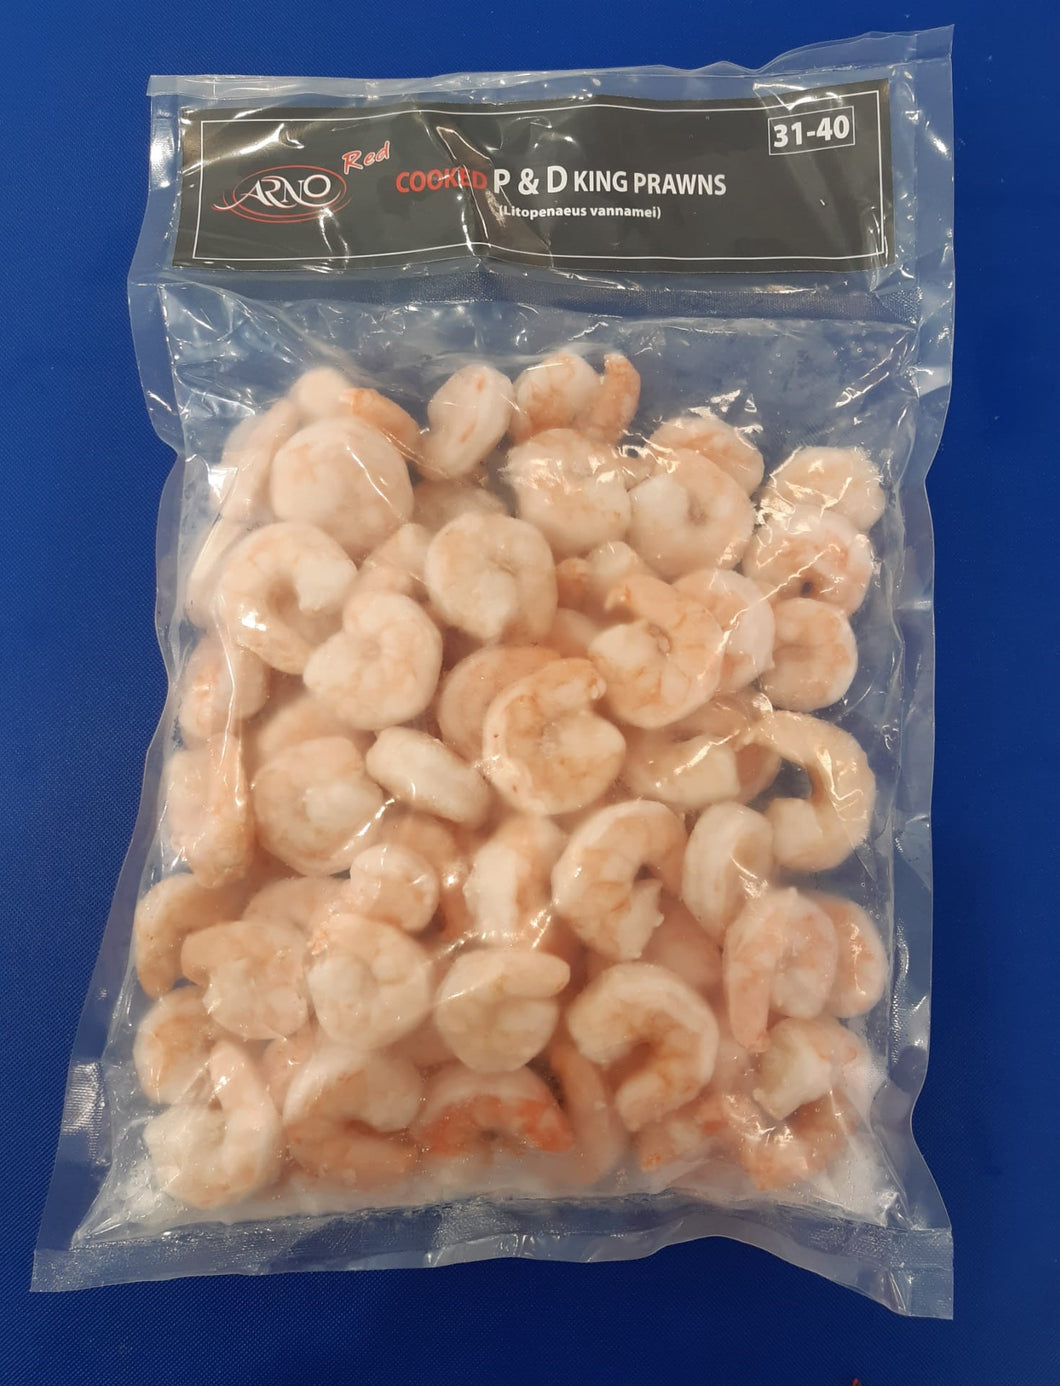 Cooked, peeled and deveined Prawns - 800g pack